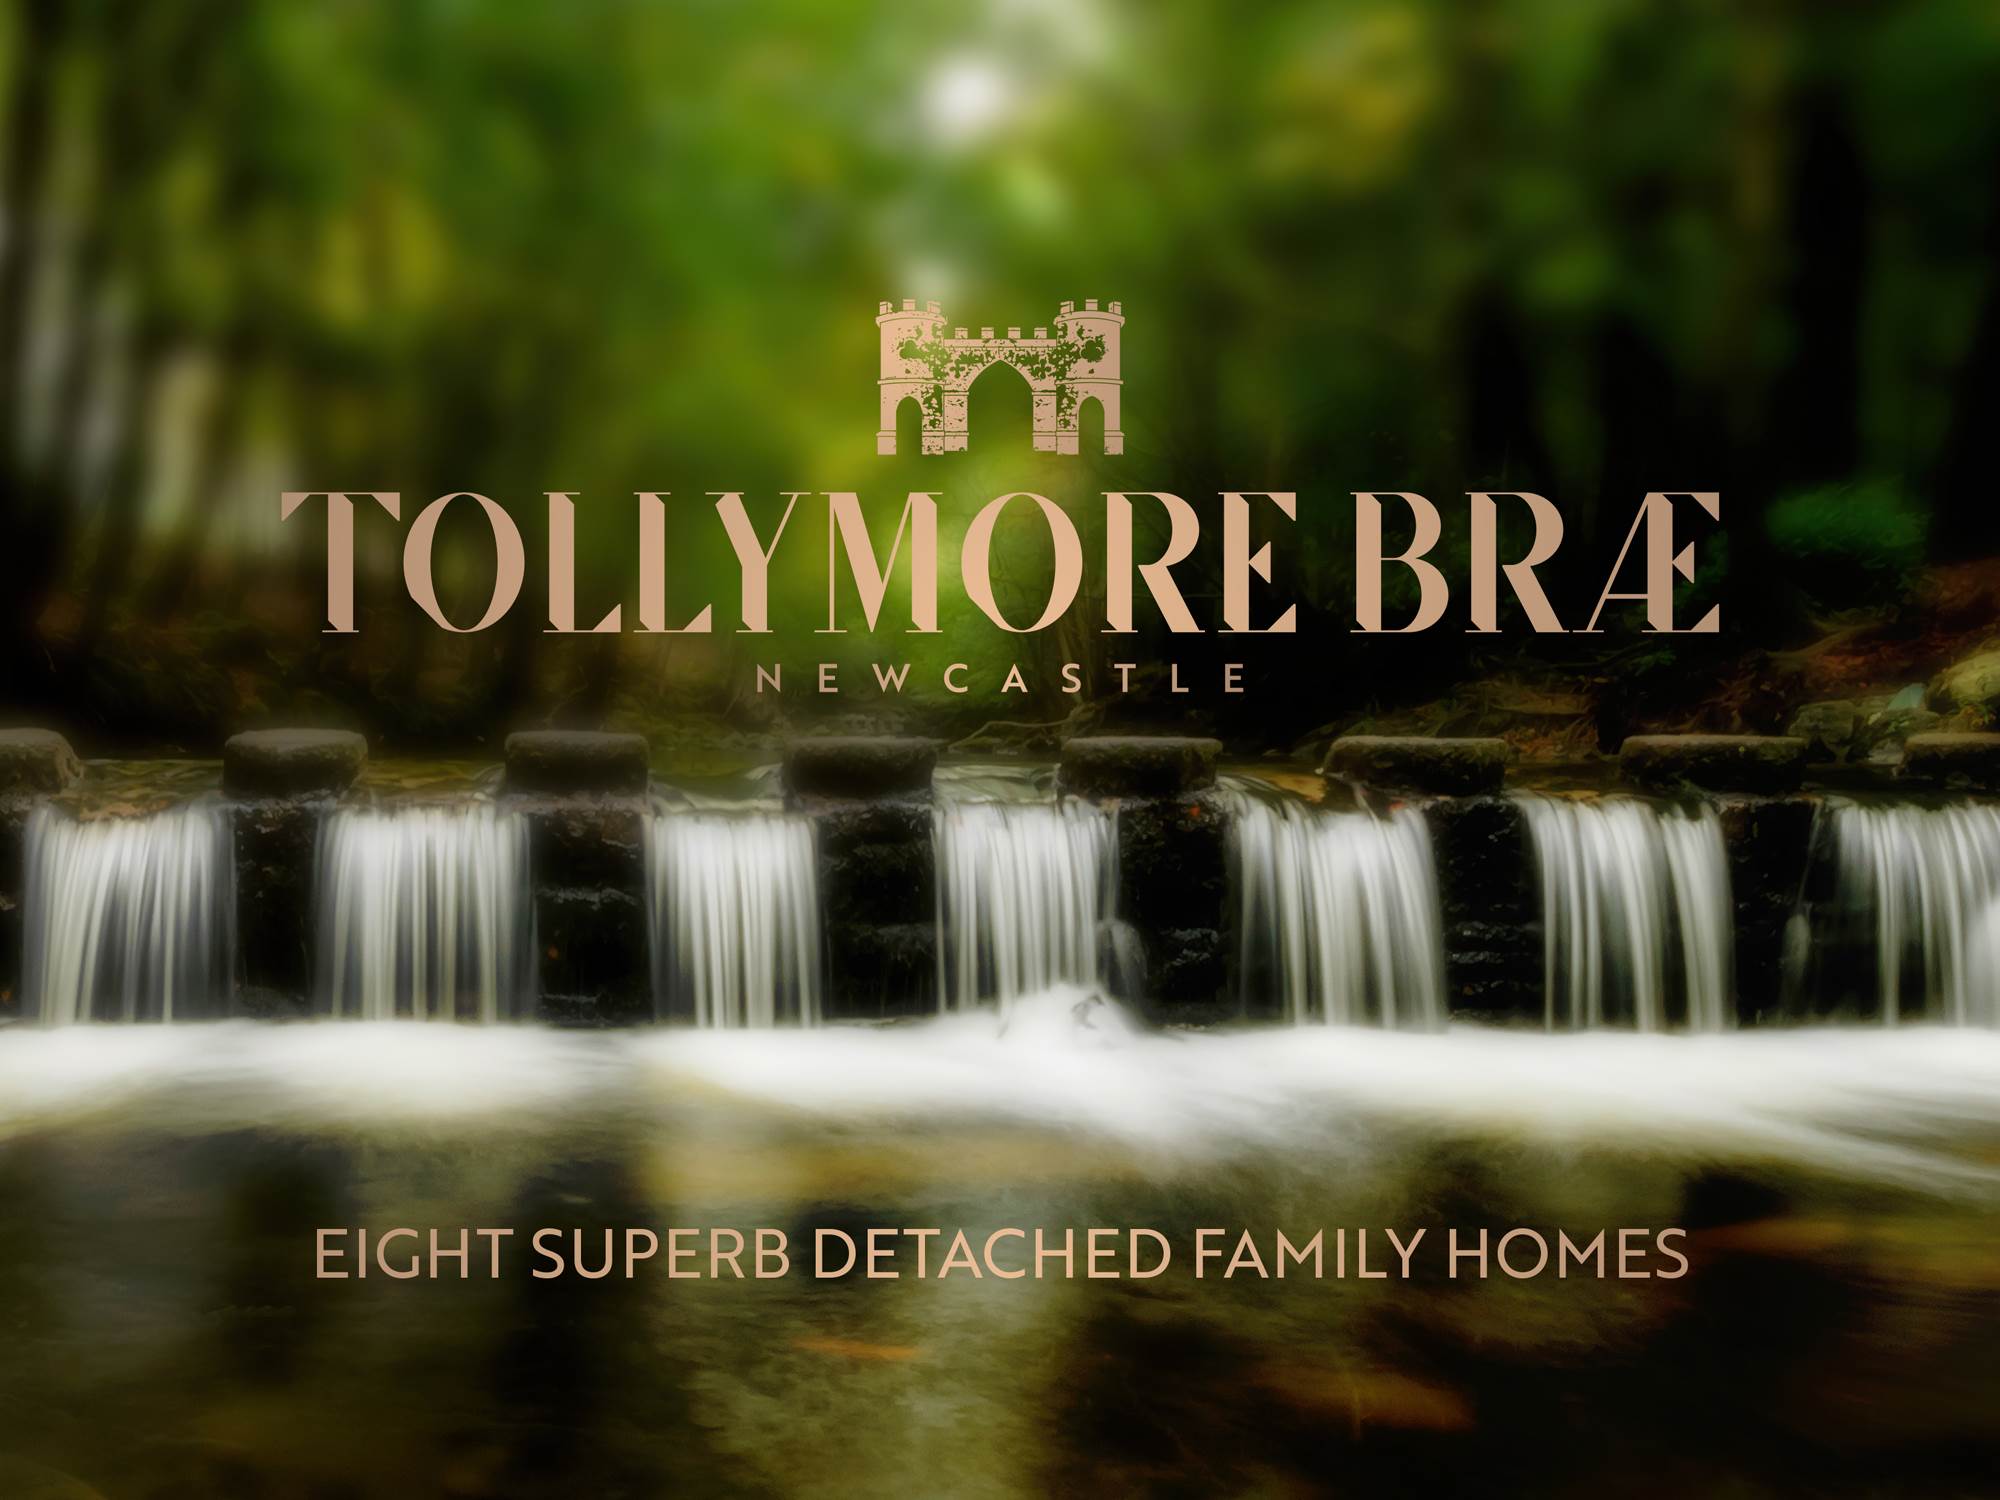 Site 6 Tollymore Brae